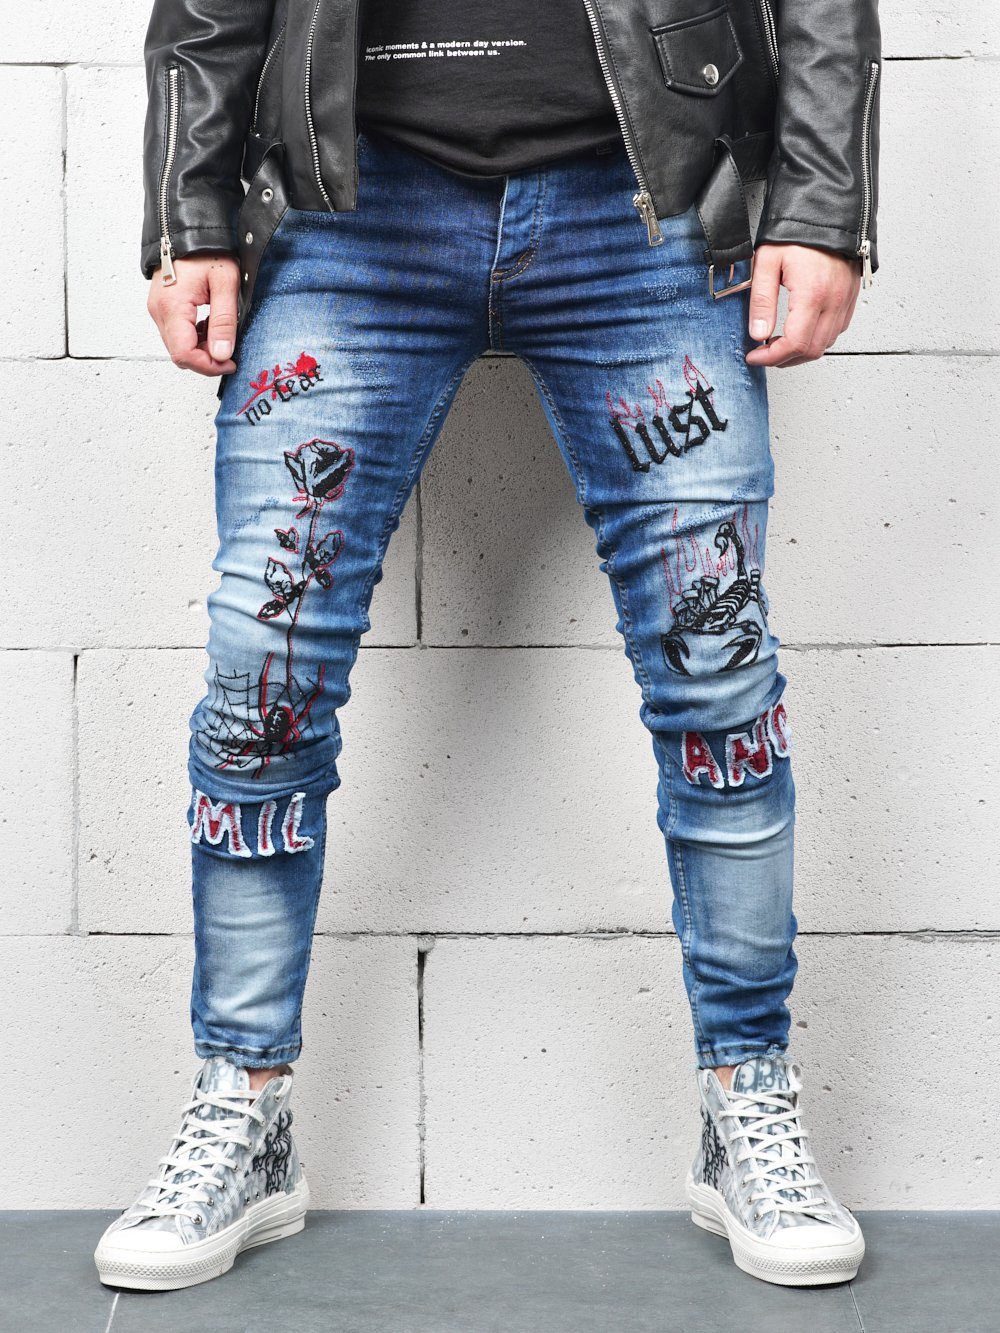 Side Chain Hollow Out Jeans Street Wear Pants JKP4332  Jeans with chains,  Jeans with chains on the side, Smart casual outfit